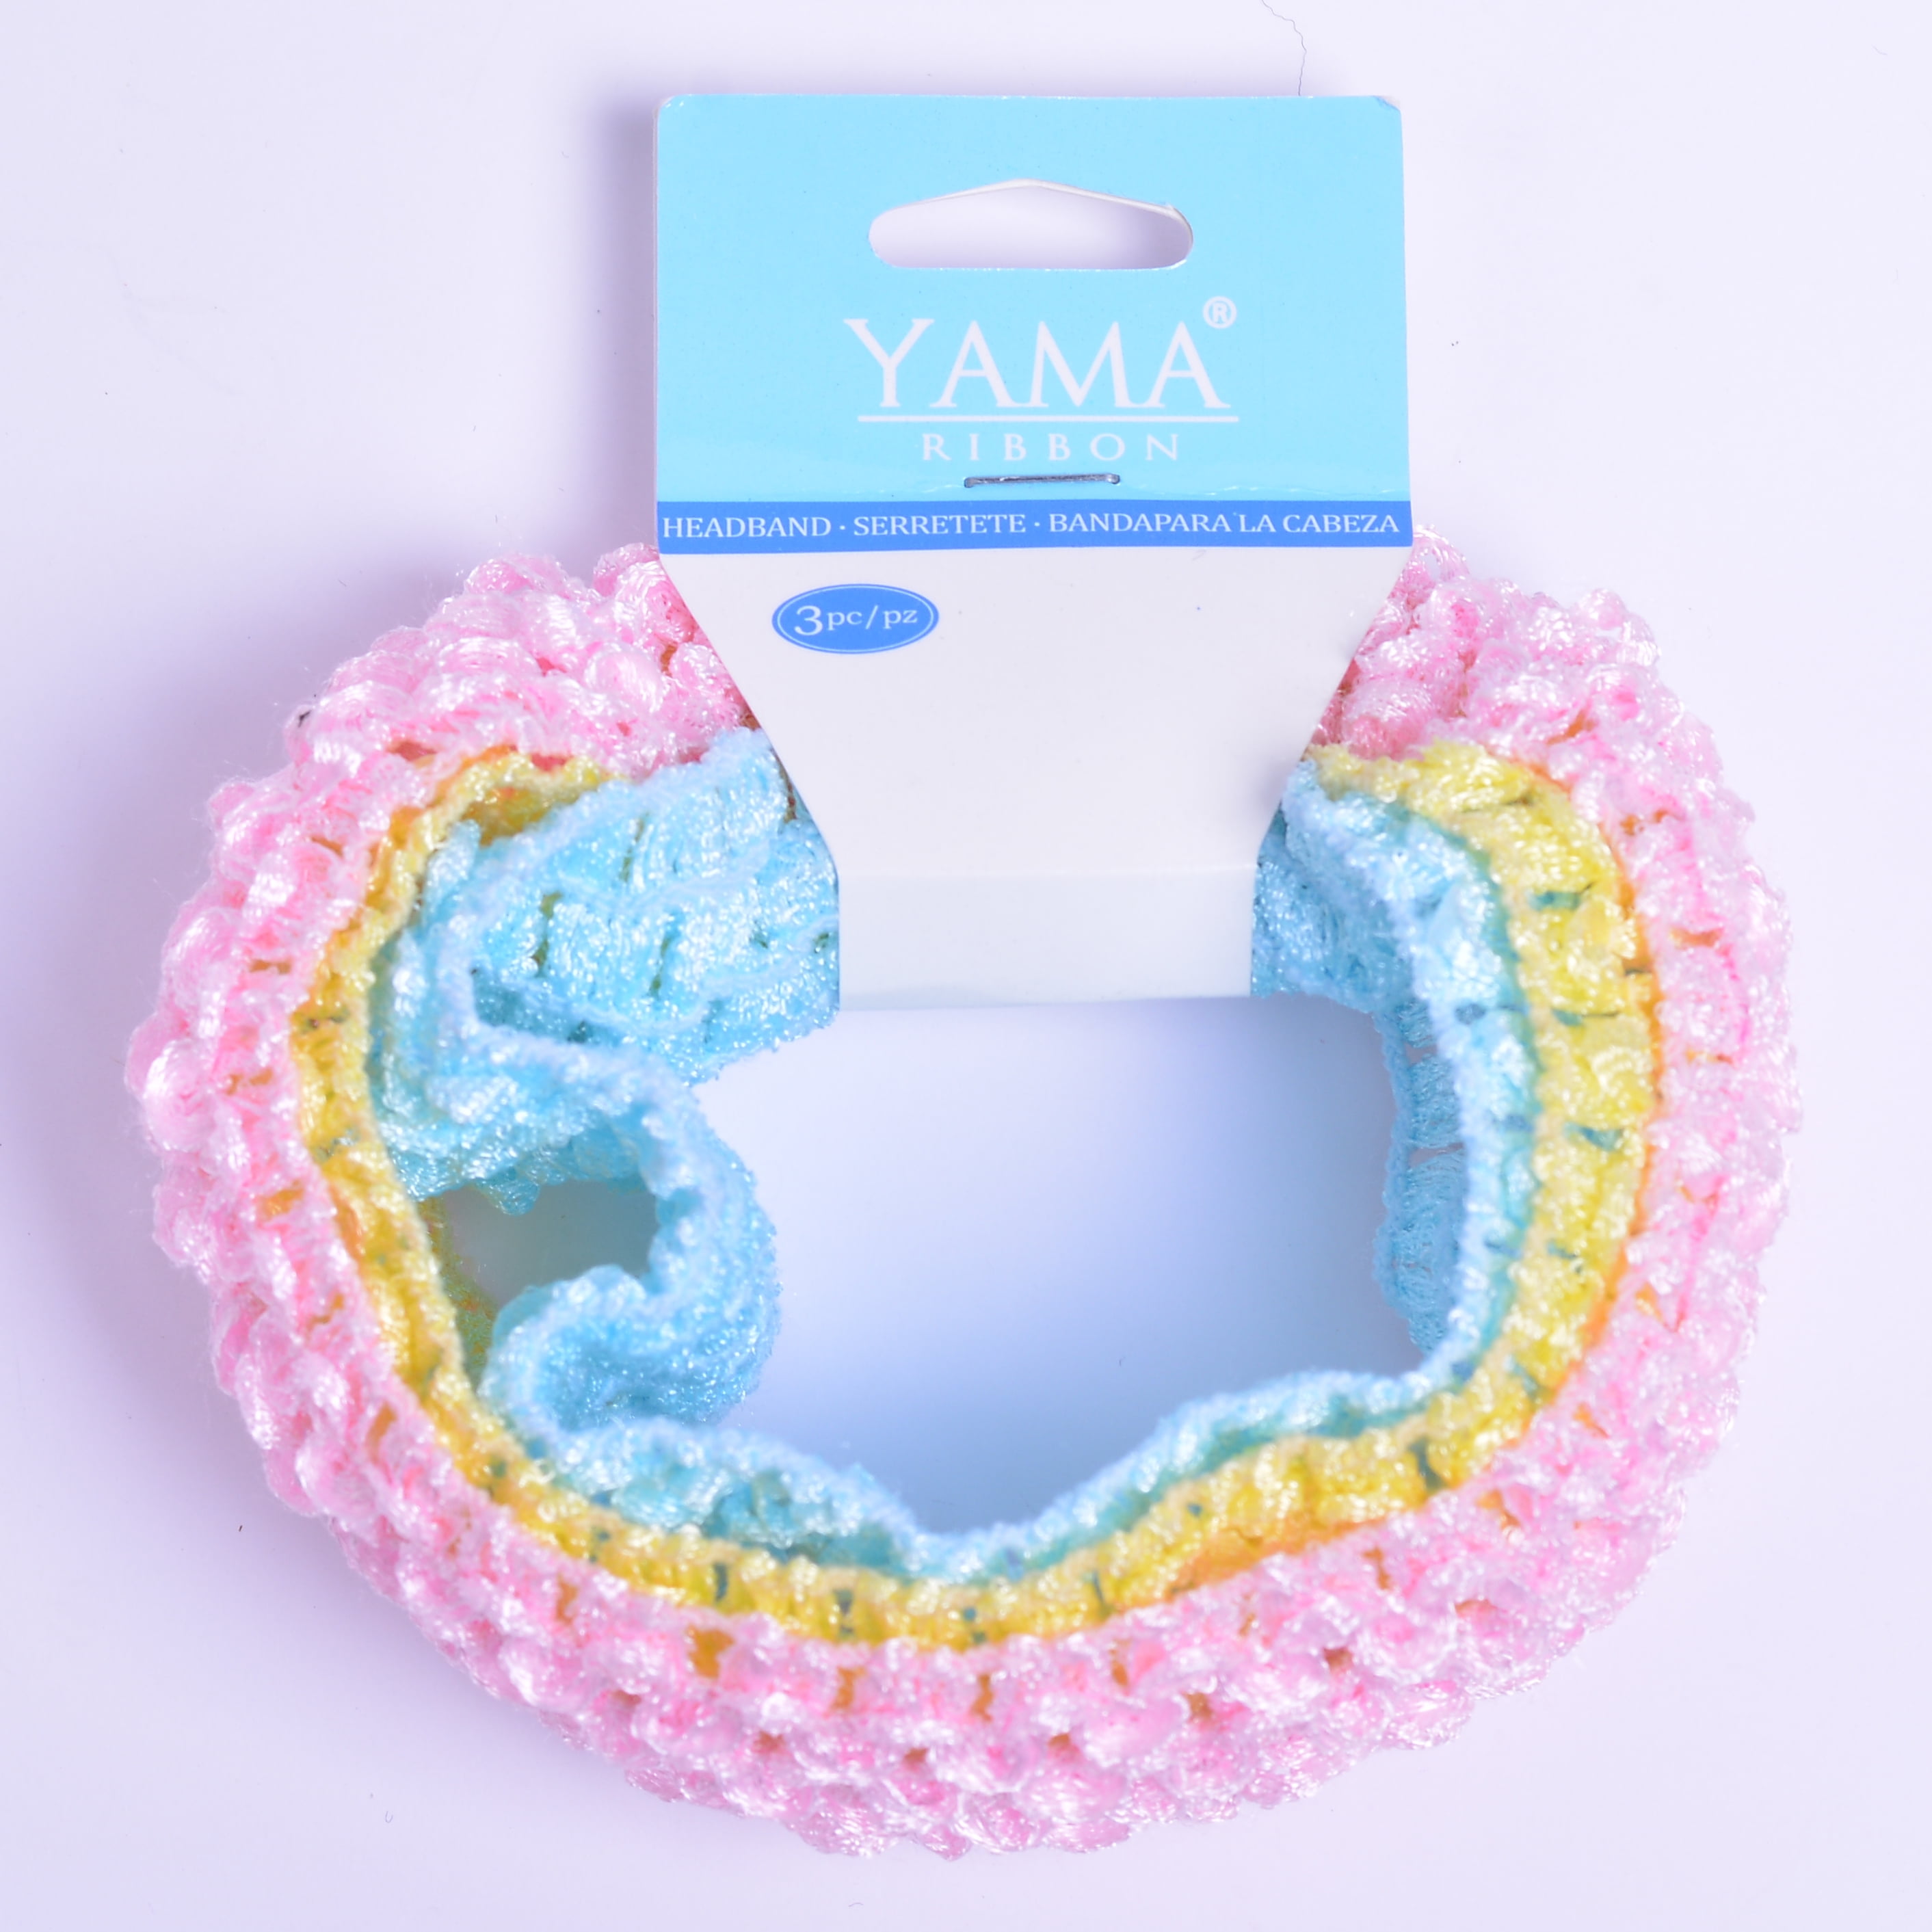 Yama Ribbon, Acc Knit Croch Headband in Pink/Blue/Yellow for Women, Teen,  Girls, 3 Colors Pack 